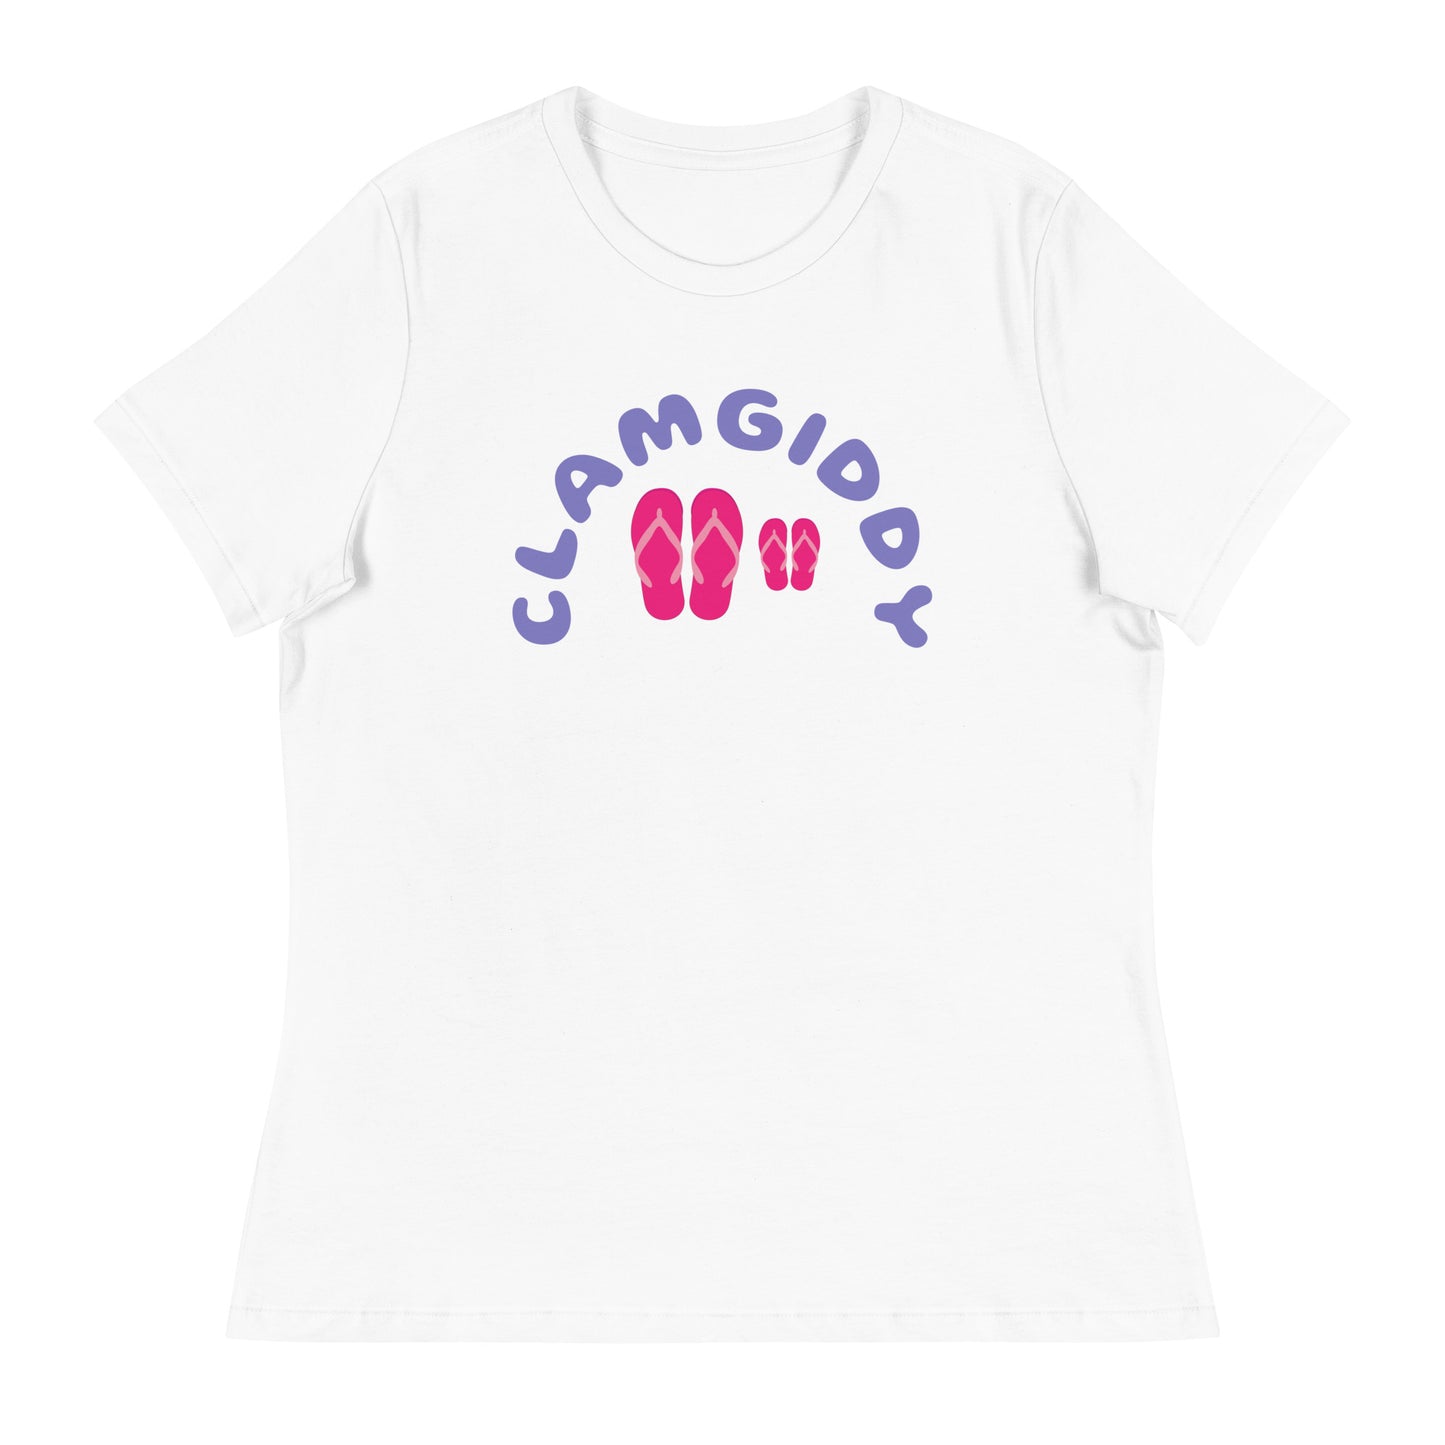 CLAMGIDDY MOM AND DAUGHTER BEACH DAY Women's Relaxed T-Shirt